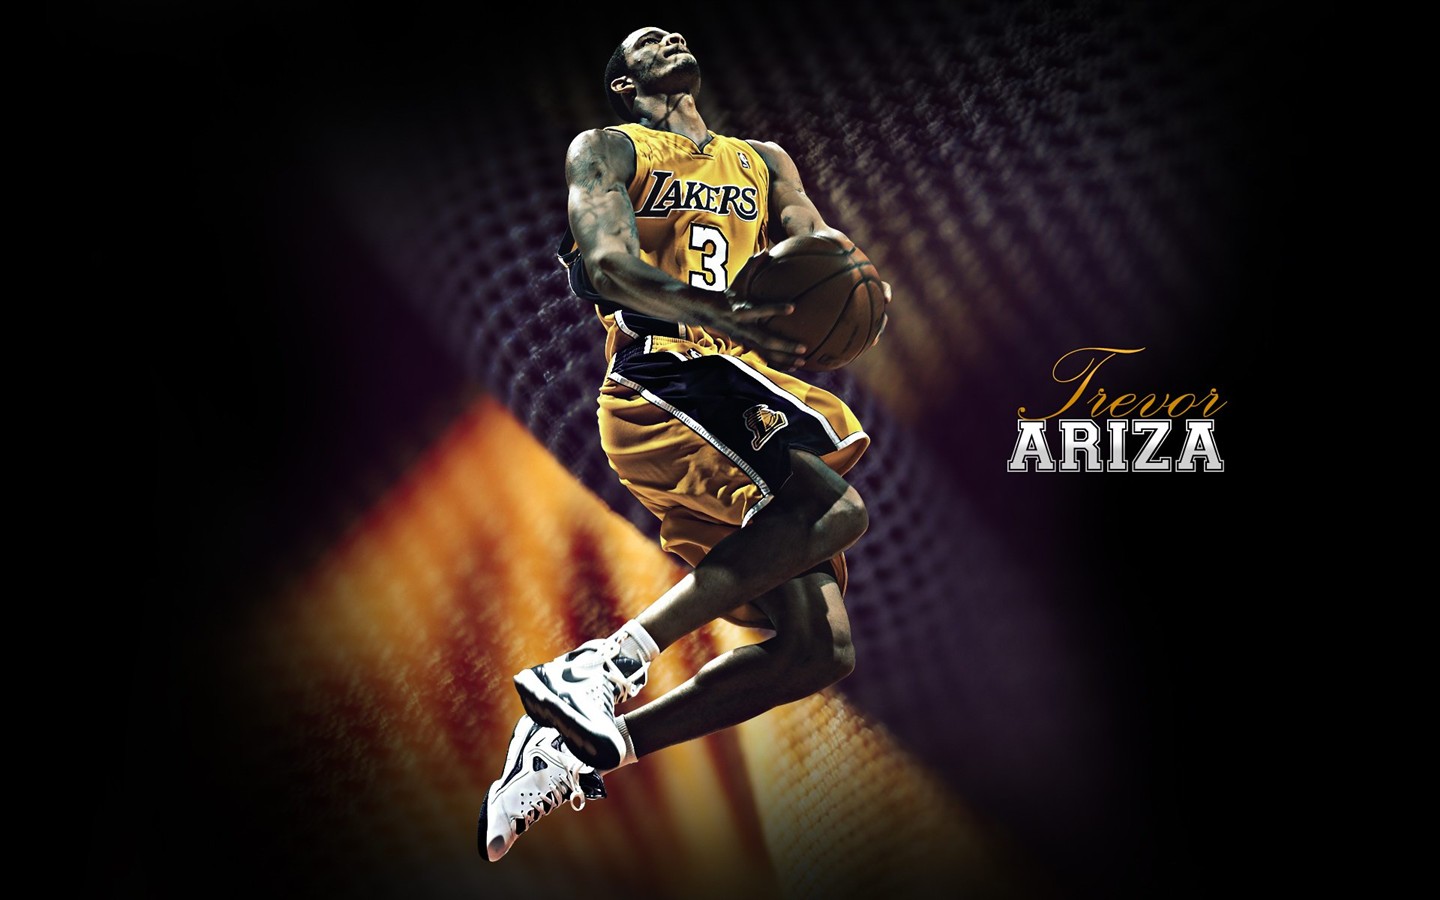 Los Angeles Lakers Wallpaper Oficial #26 - 1440x900